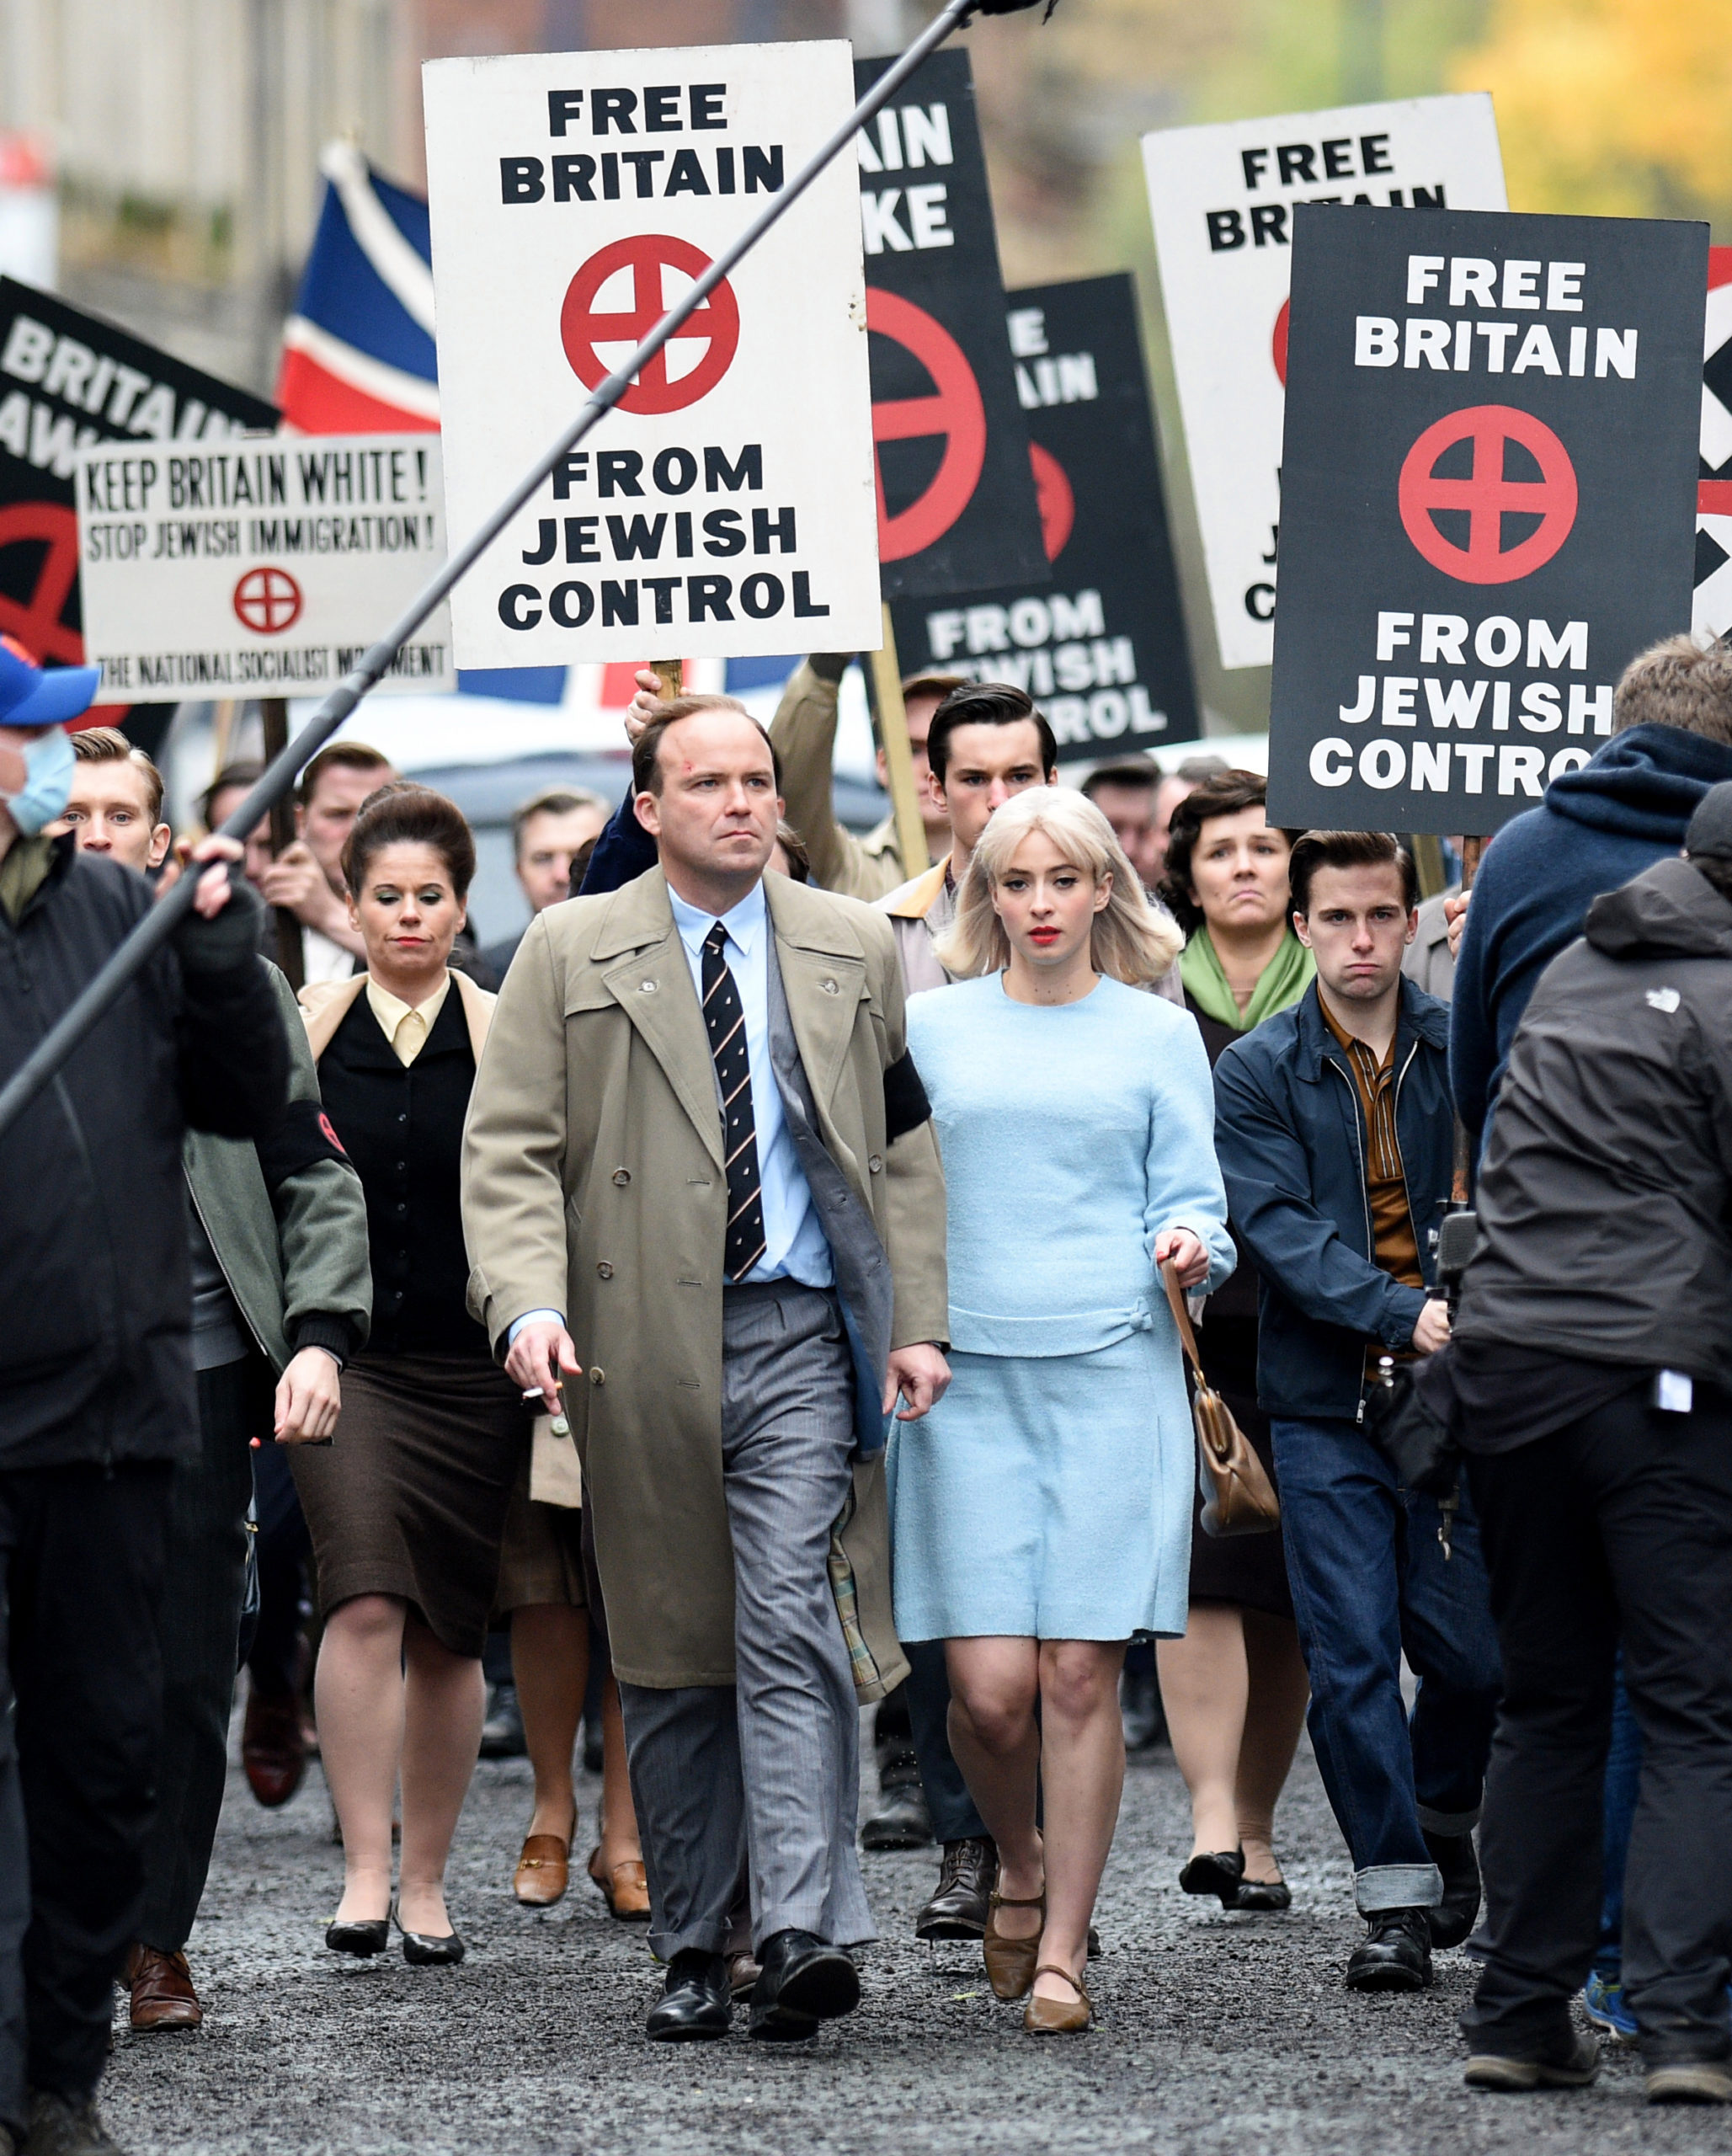 BBC Drama RIDLEY Road Based On The Antifascist Coalition 62 Group True Story Complete Details!